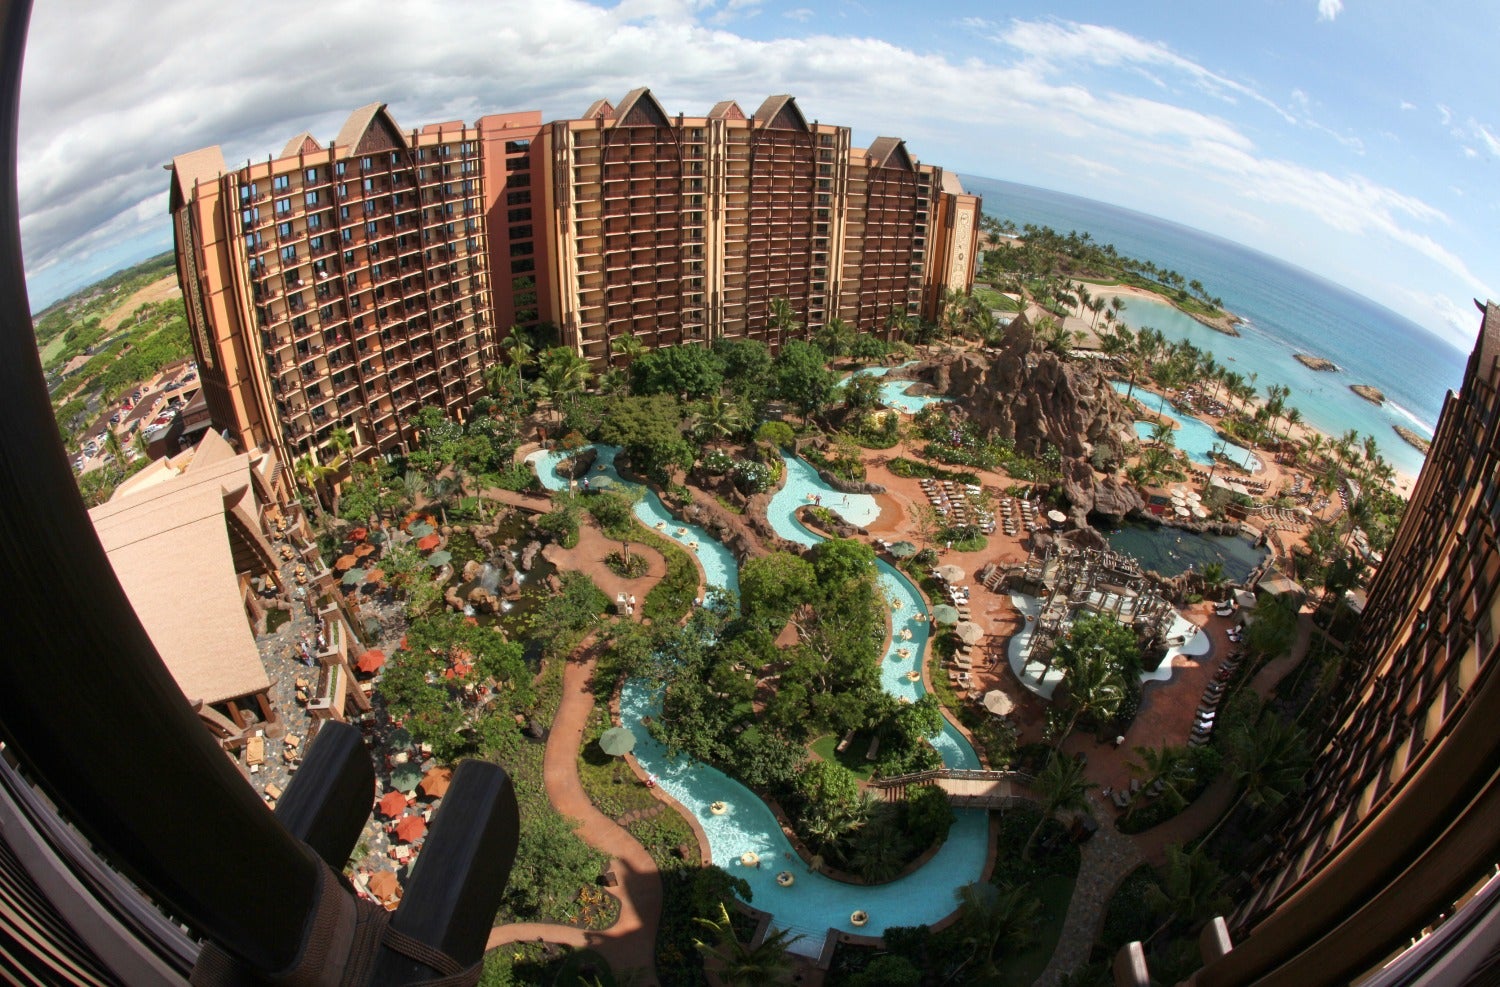 How to Save Money Booking a Trip to Disney's Aulani Resort - The Points Guy